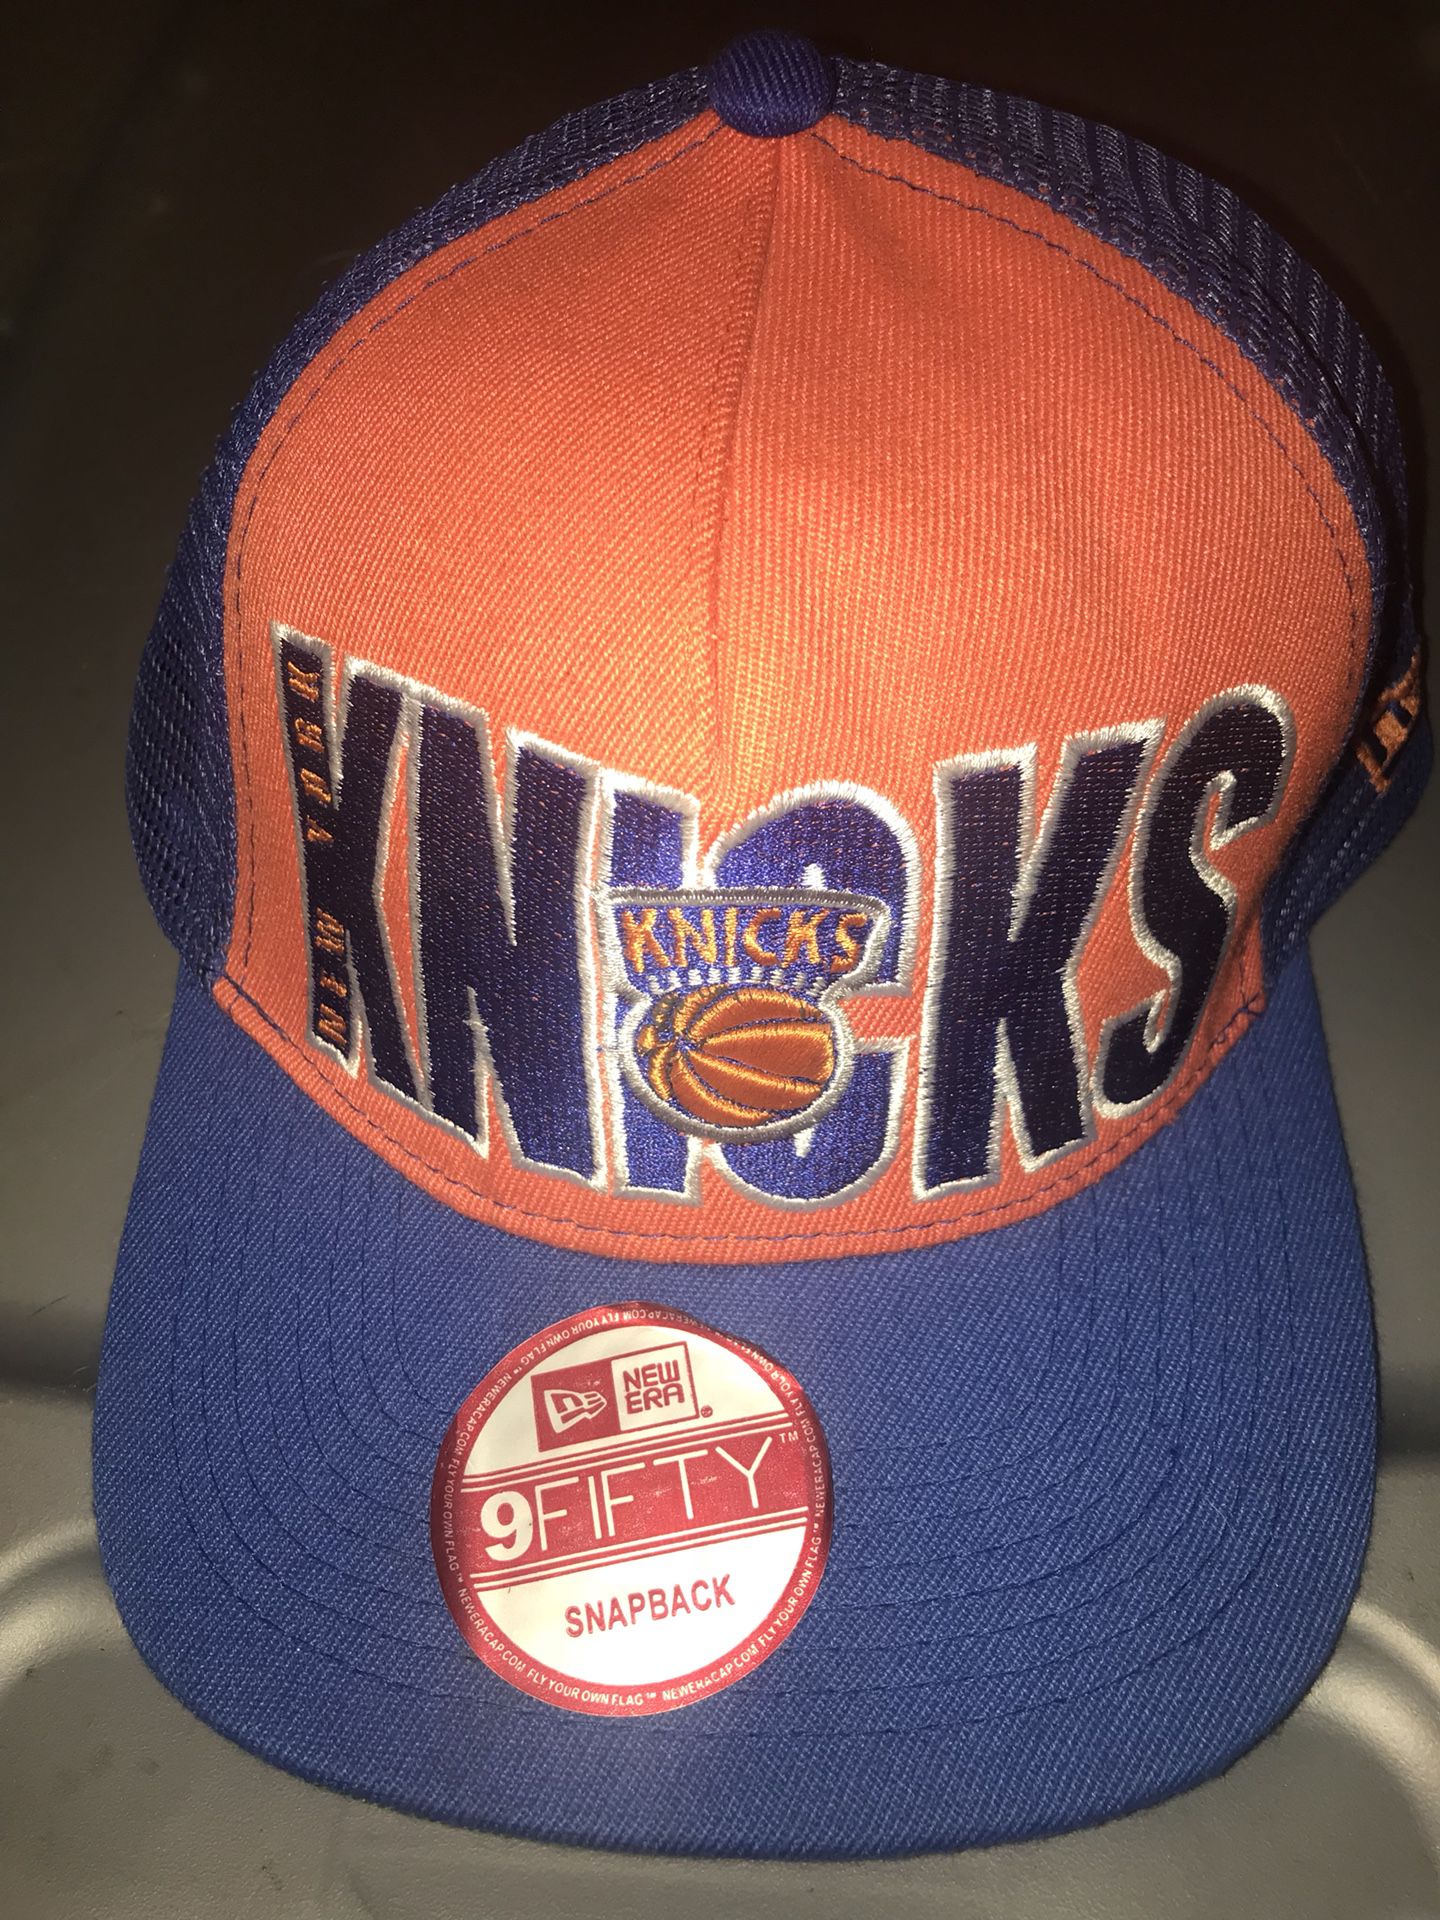 New York Knicks 9fifty Snap back hat NWT